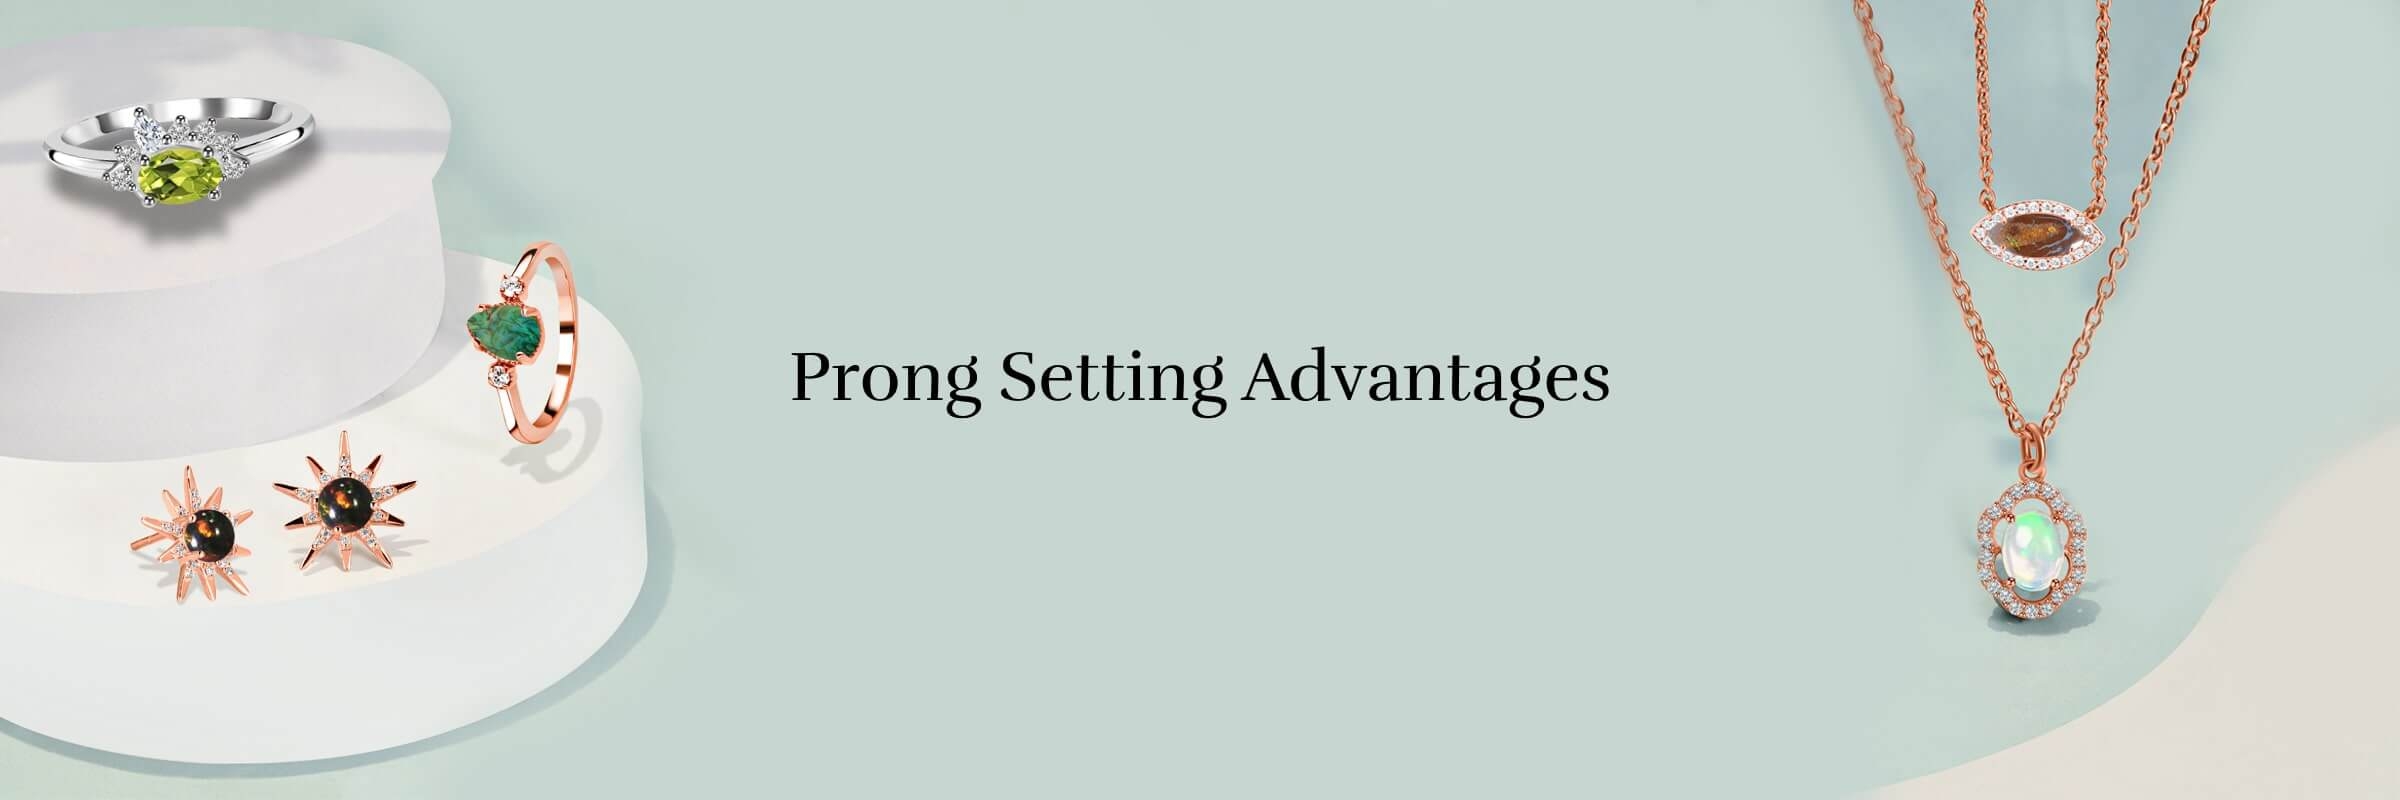 The Benefits Of A Prong Setting